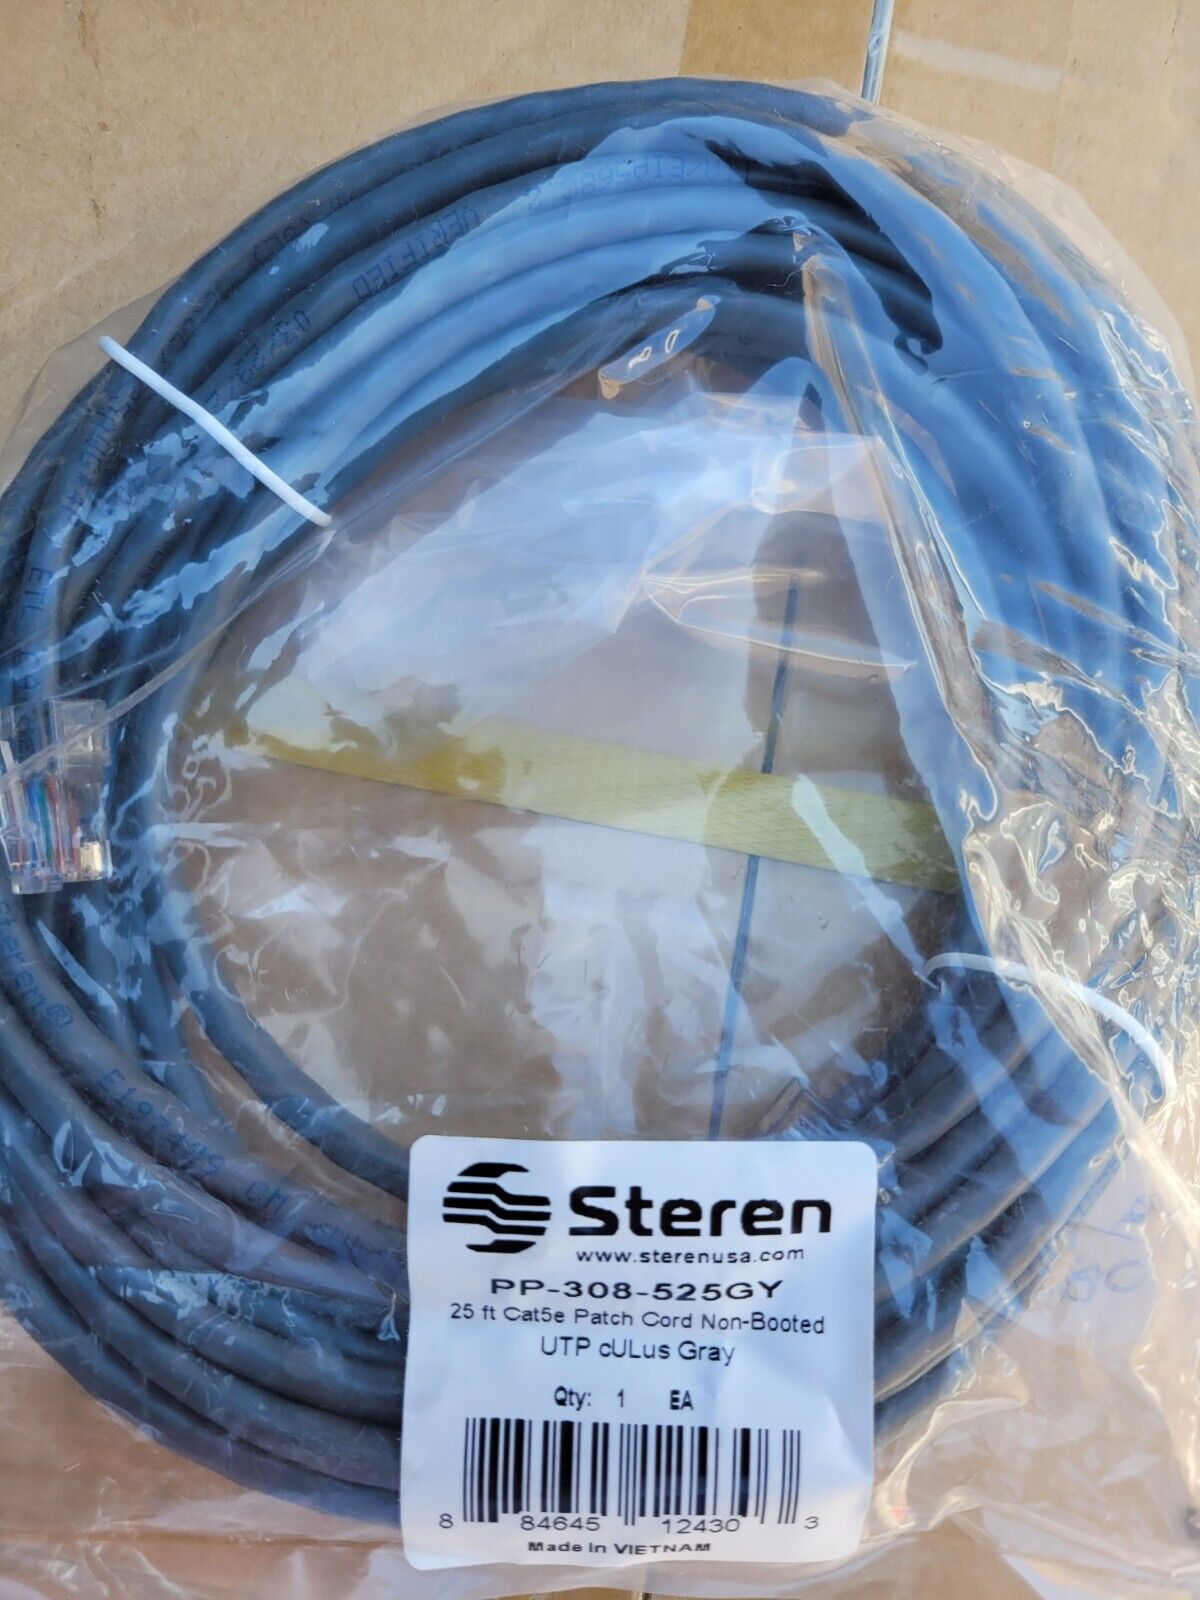 Lot 60 NEW Steren pp-308-525gy 25ft Cat5e Patch Cord Non-Boot Gray